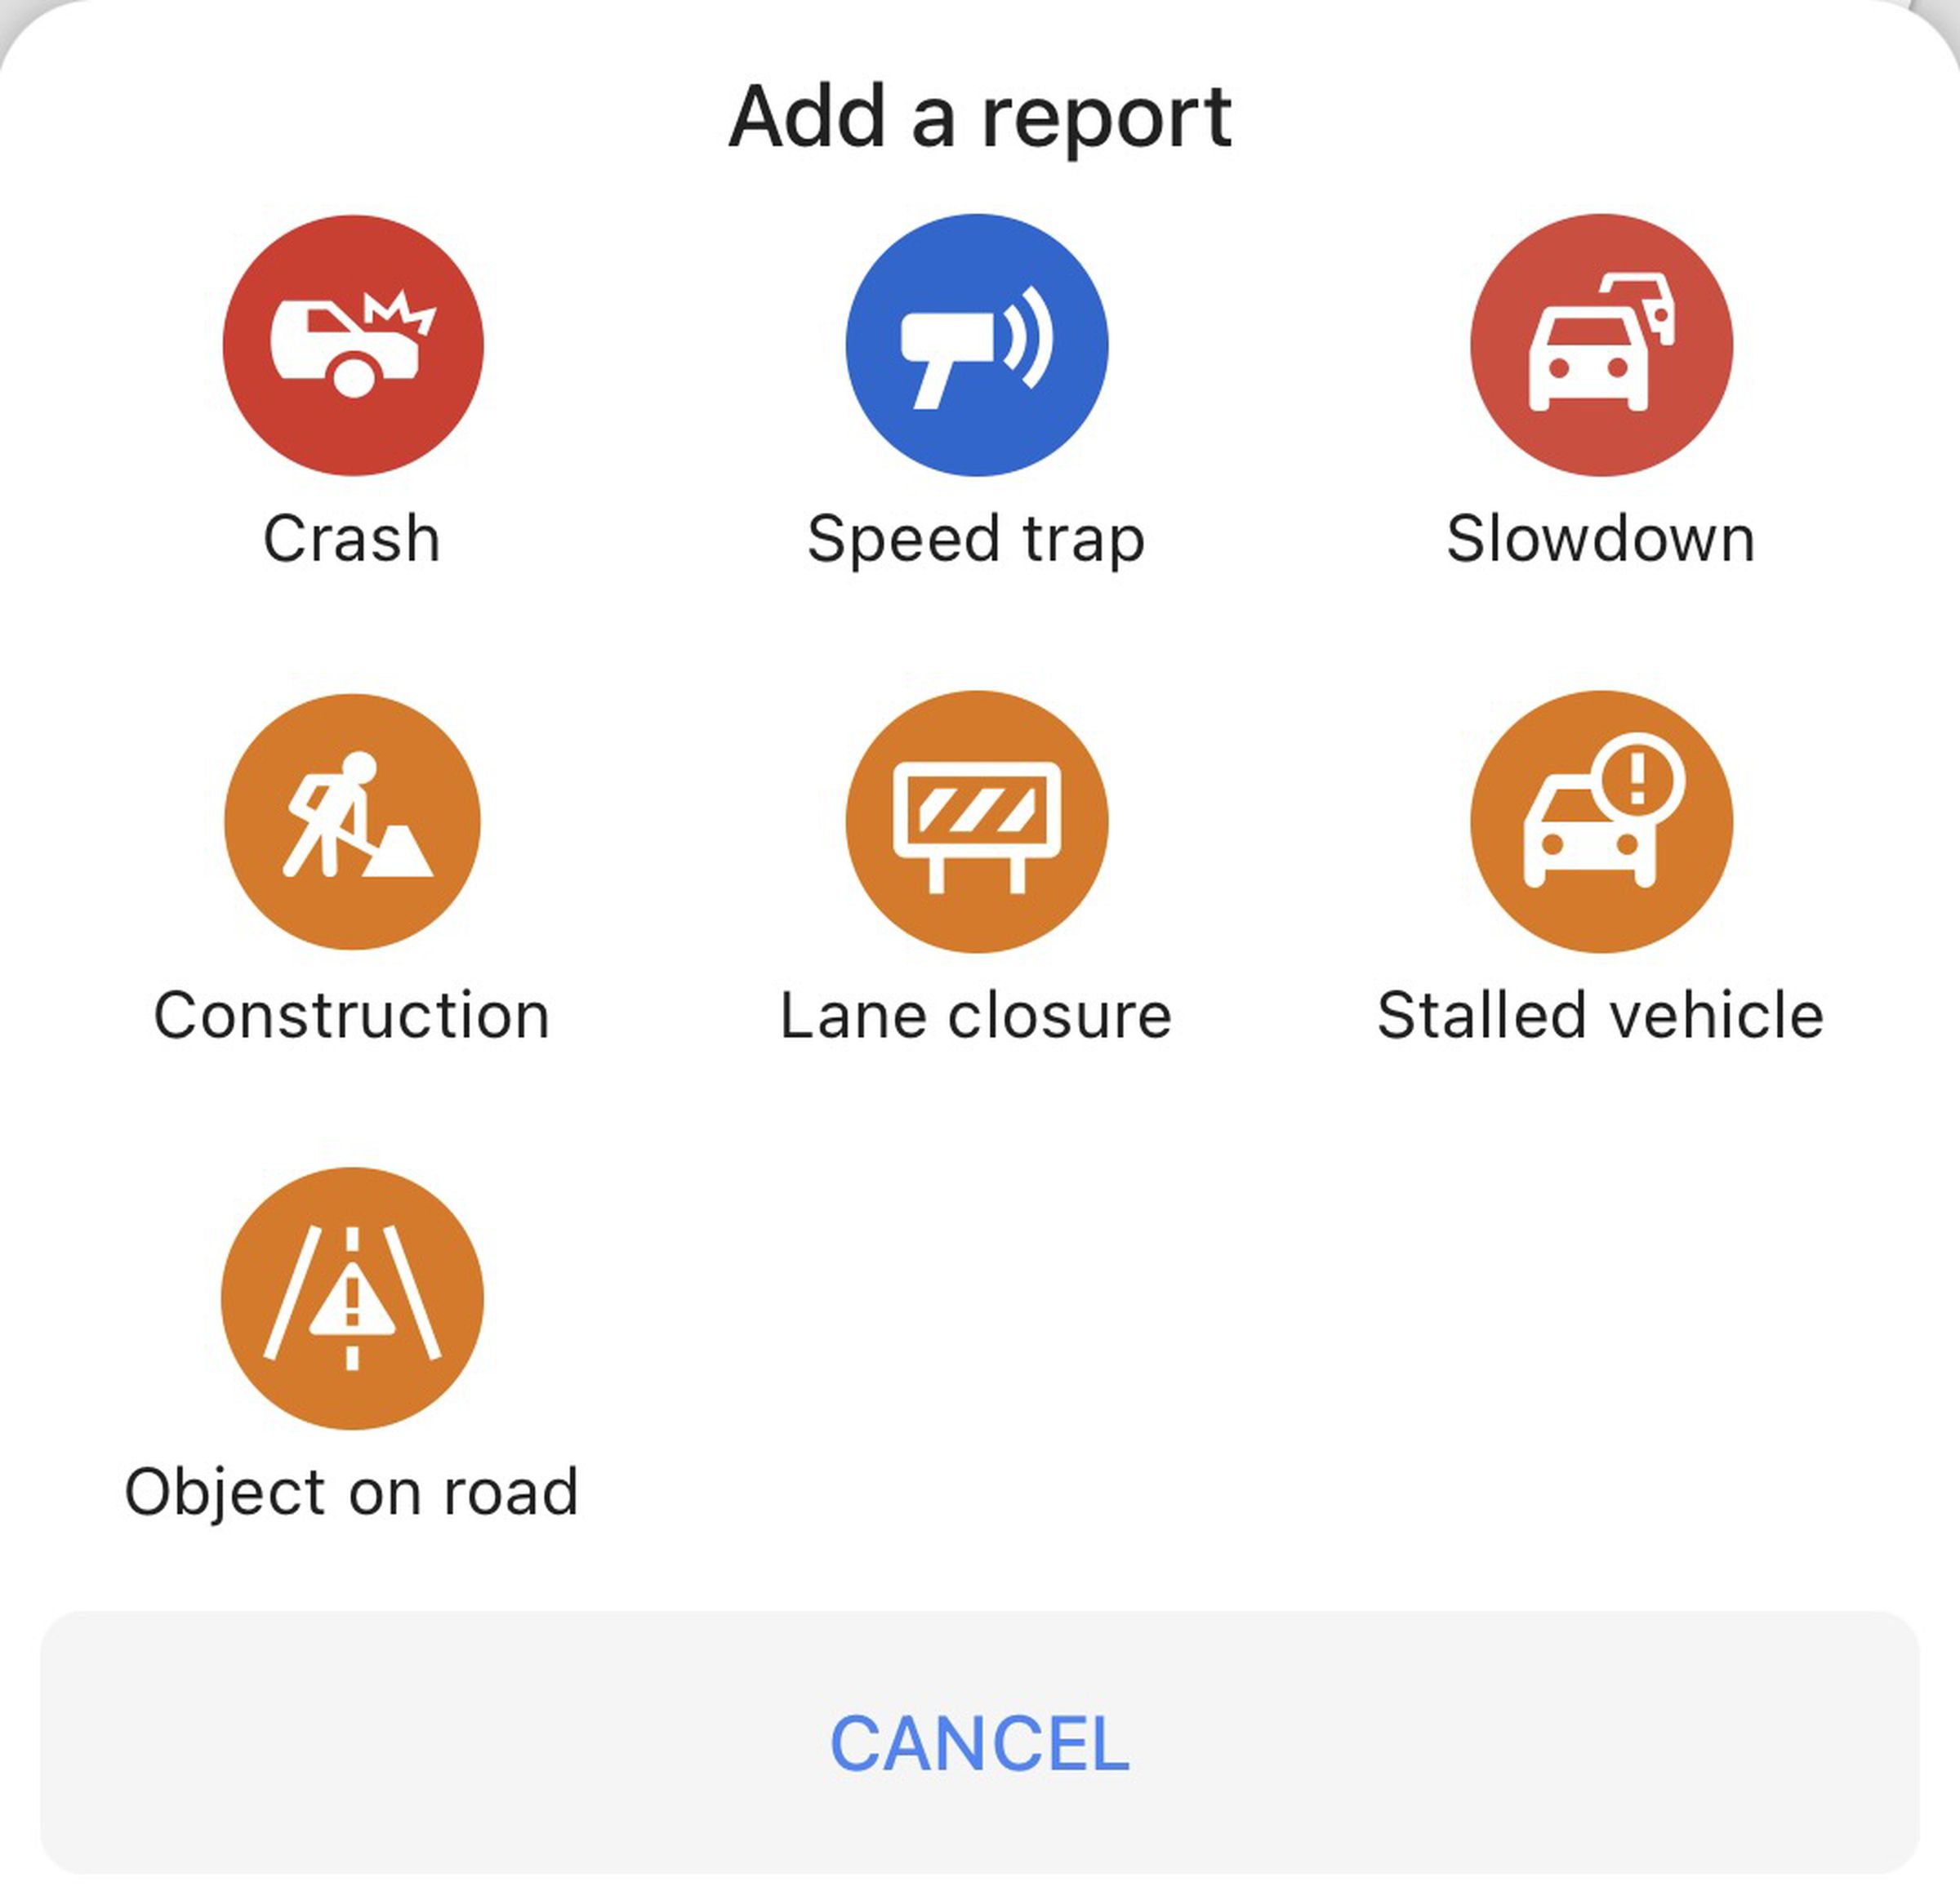 Google’s report interface has more options for hazard/incident types.